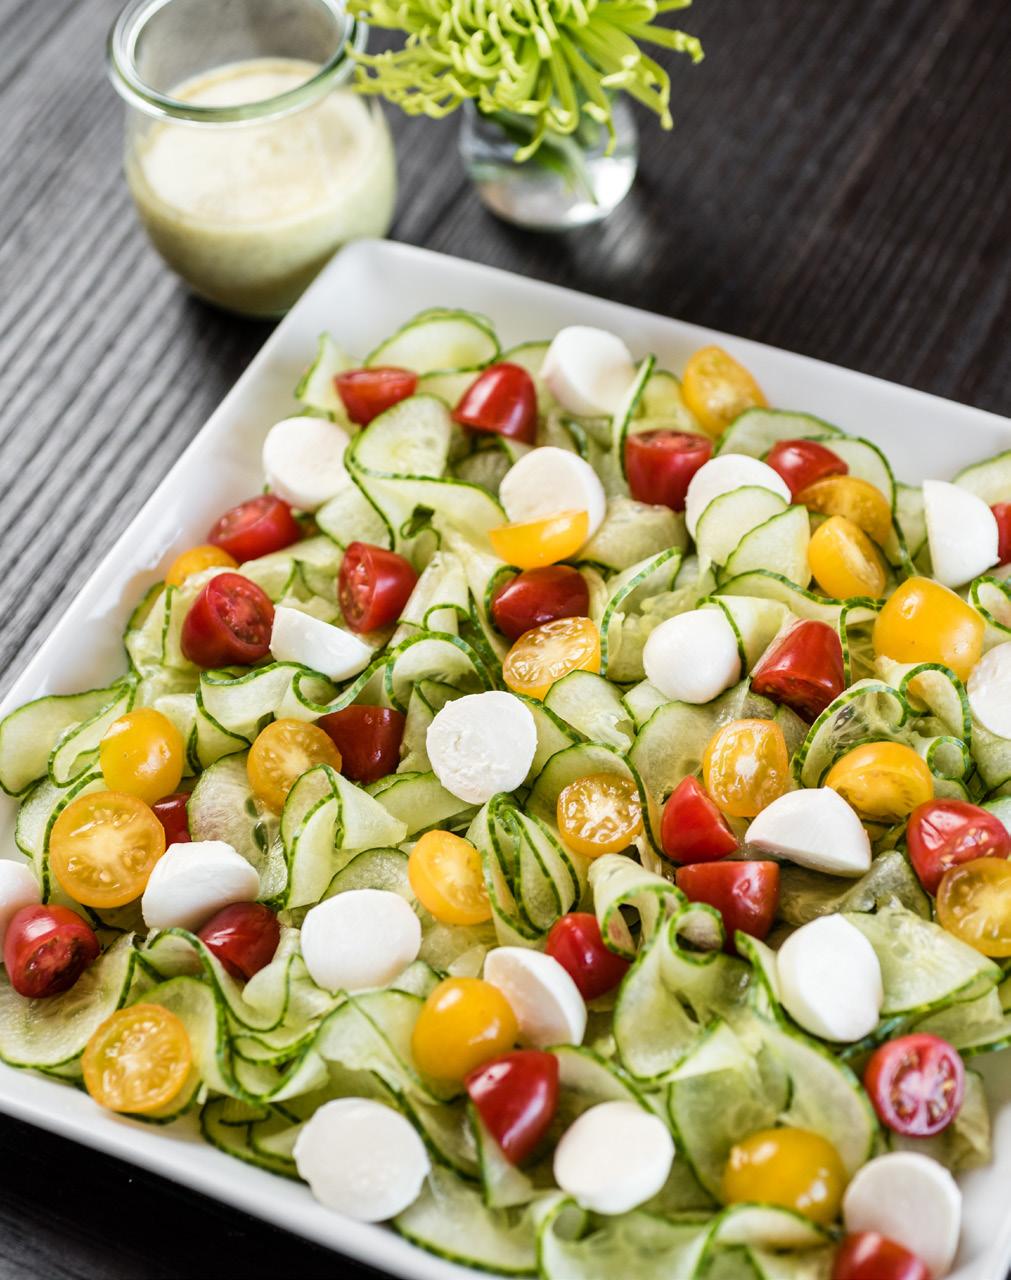 Cucumber Caprese Salad Serves: 8 2 medium seedless cucumbers 1 cup red cherry tomato halves 1 cup yellow cherry tomato halves 1 cup fresh mozzarella balls, halved Salt and coarse black pepper 1/3 cup